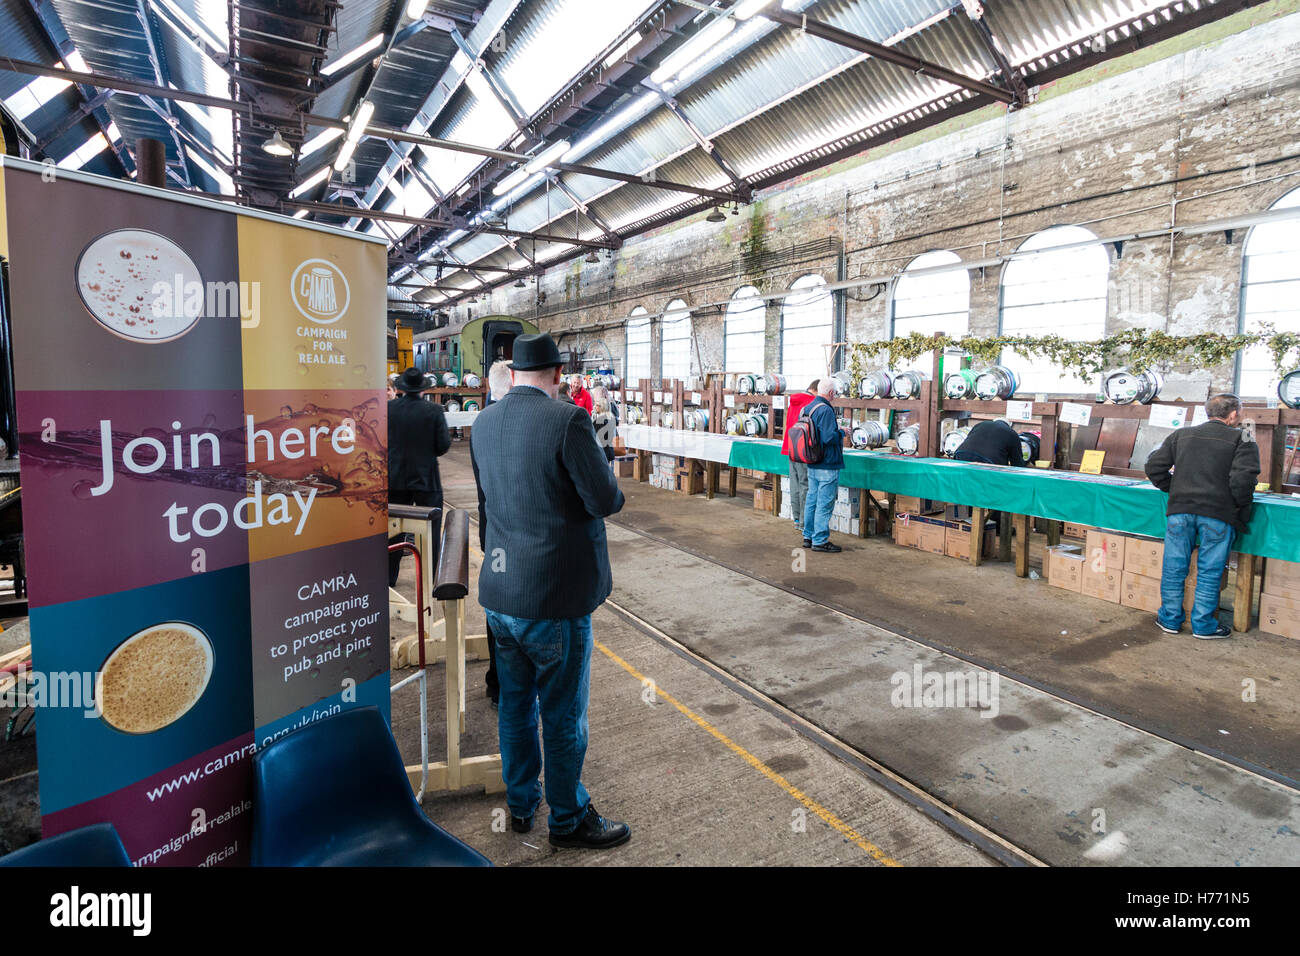 England, Tunbridge Wells. CAMRA real ale beer festival in old locomotive shed. Sign, 'join here today' at entrance, and then hall with few people. Stock Photo